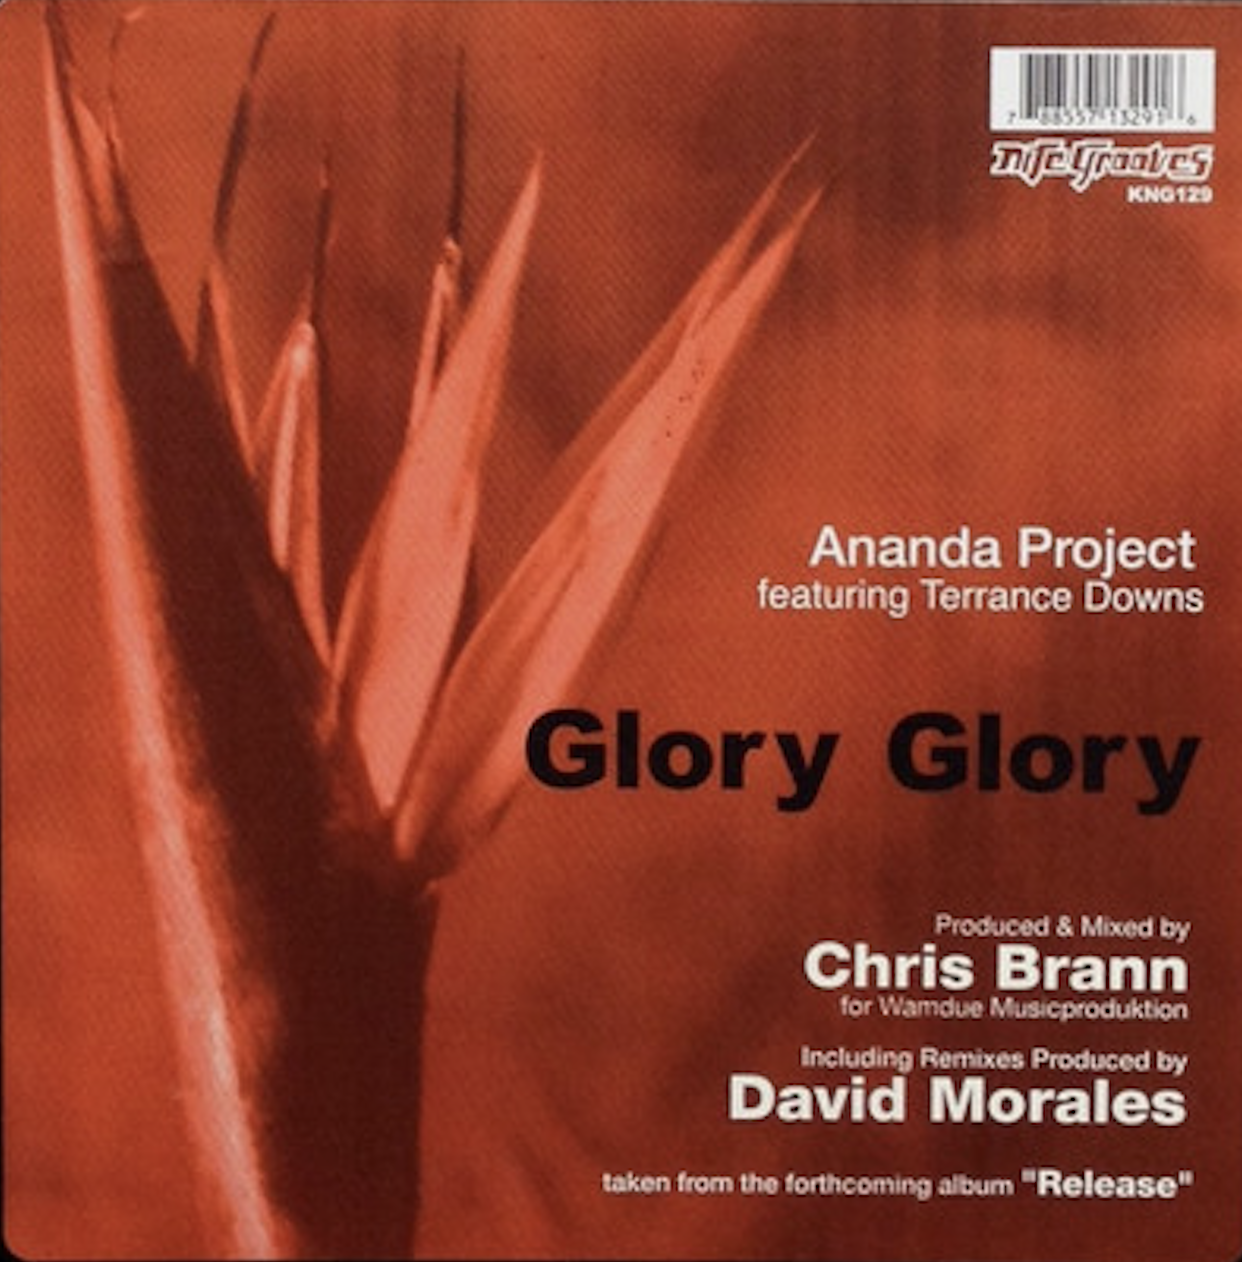 Ananda Project featuring Terrance Owens — Glory Glory (David Morales Remix) cover artwork